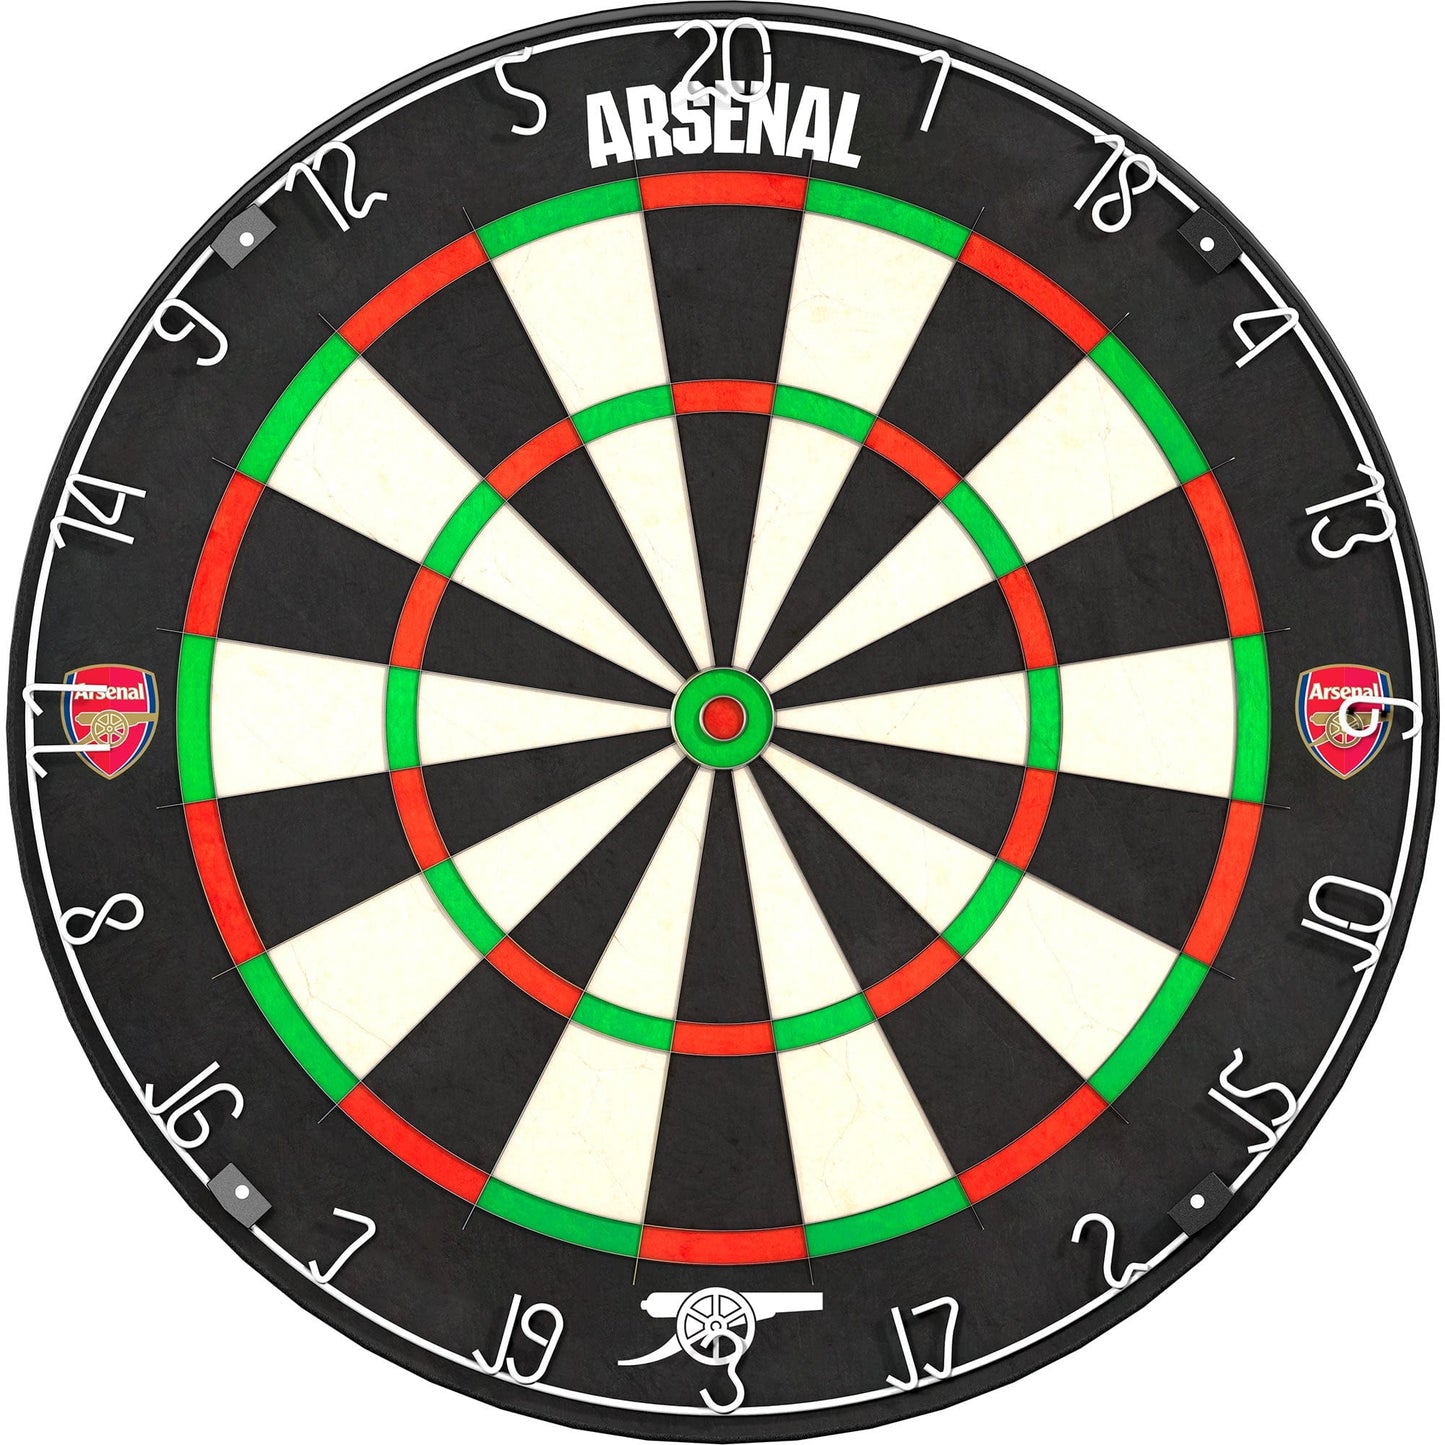 Arsenal FC Dartboard - Professional Level - Official Licensed - The Gunners - Crest